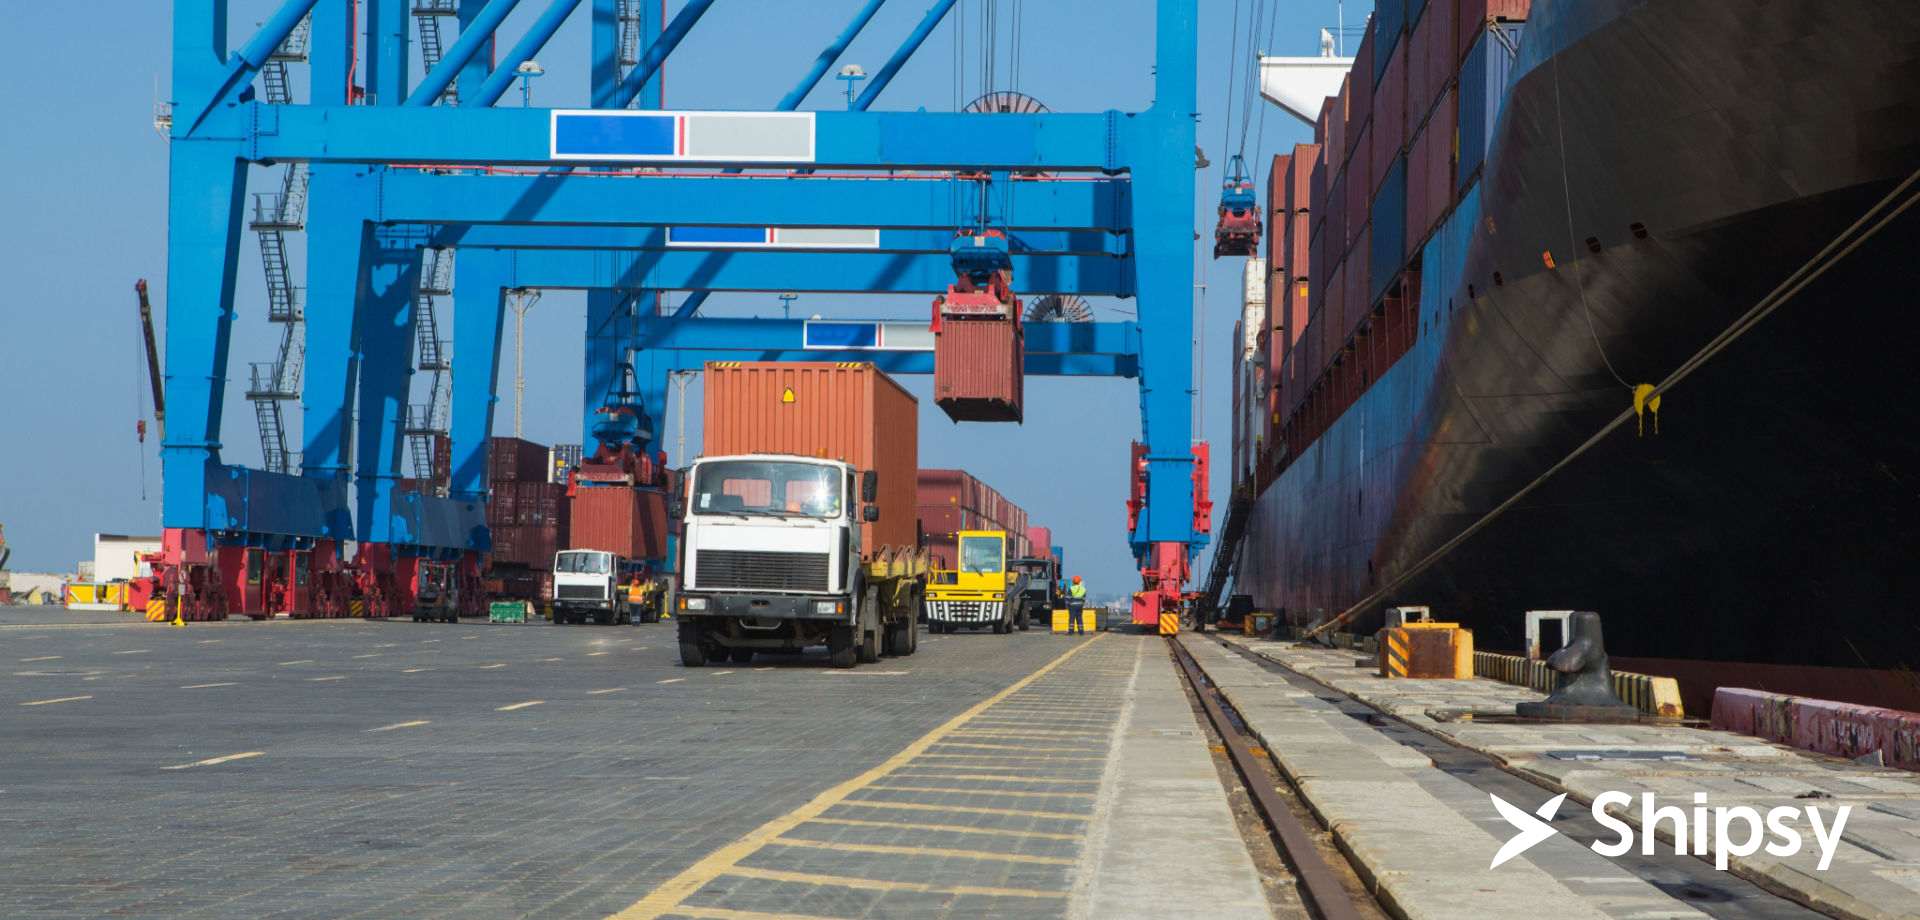 Looking for the Best Freight Management Software in UAE? Know These Things First!